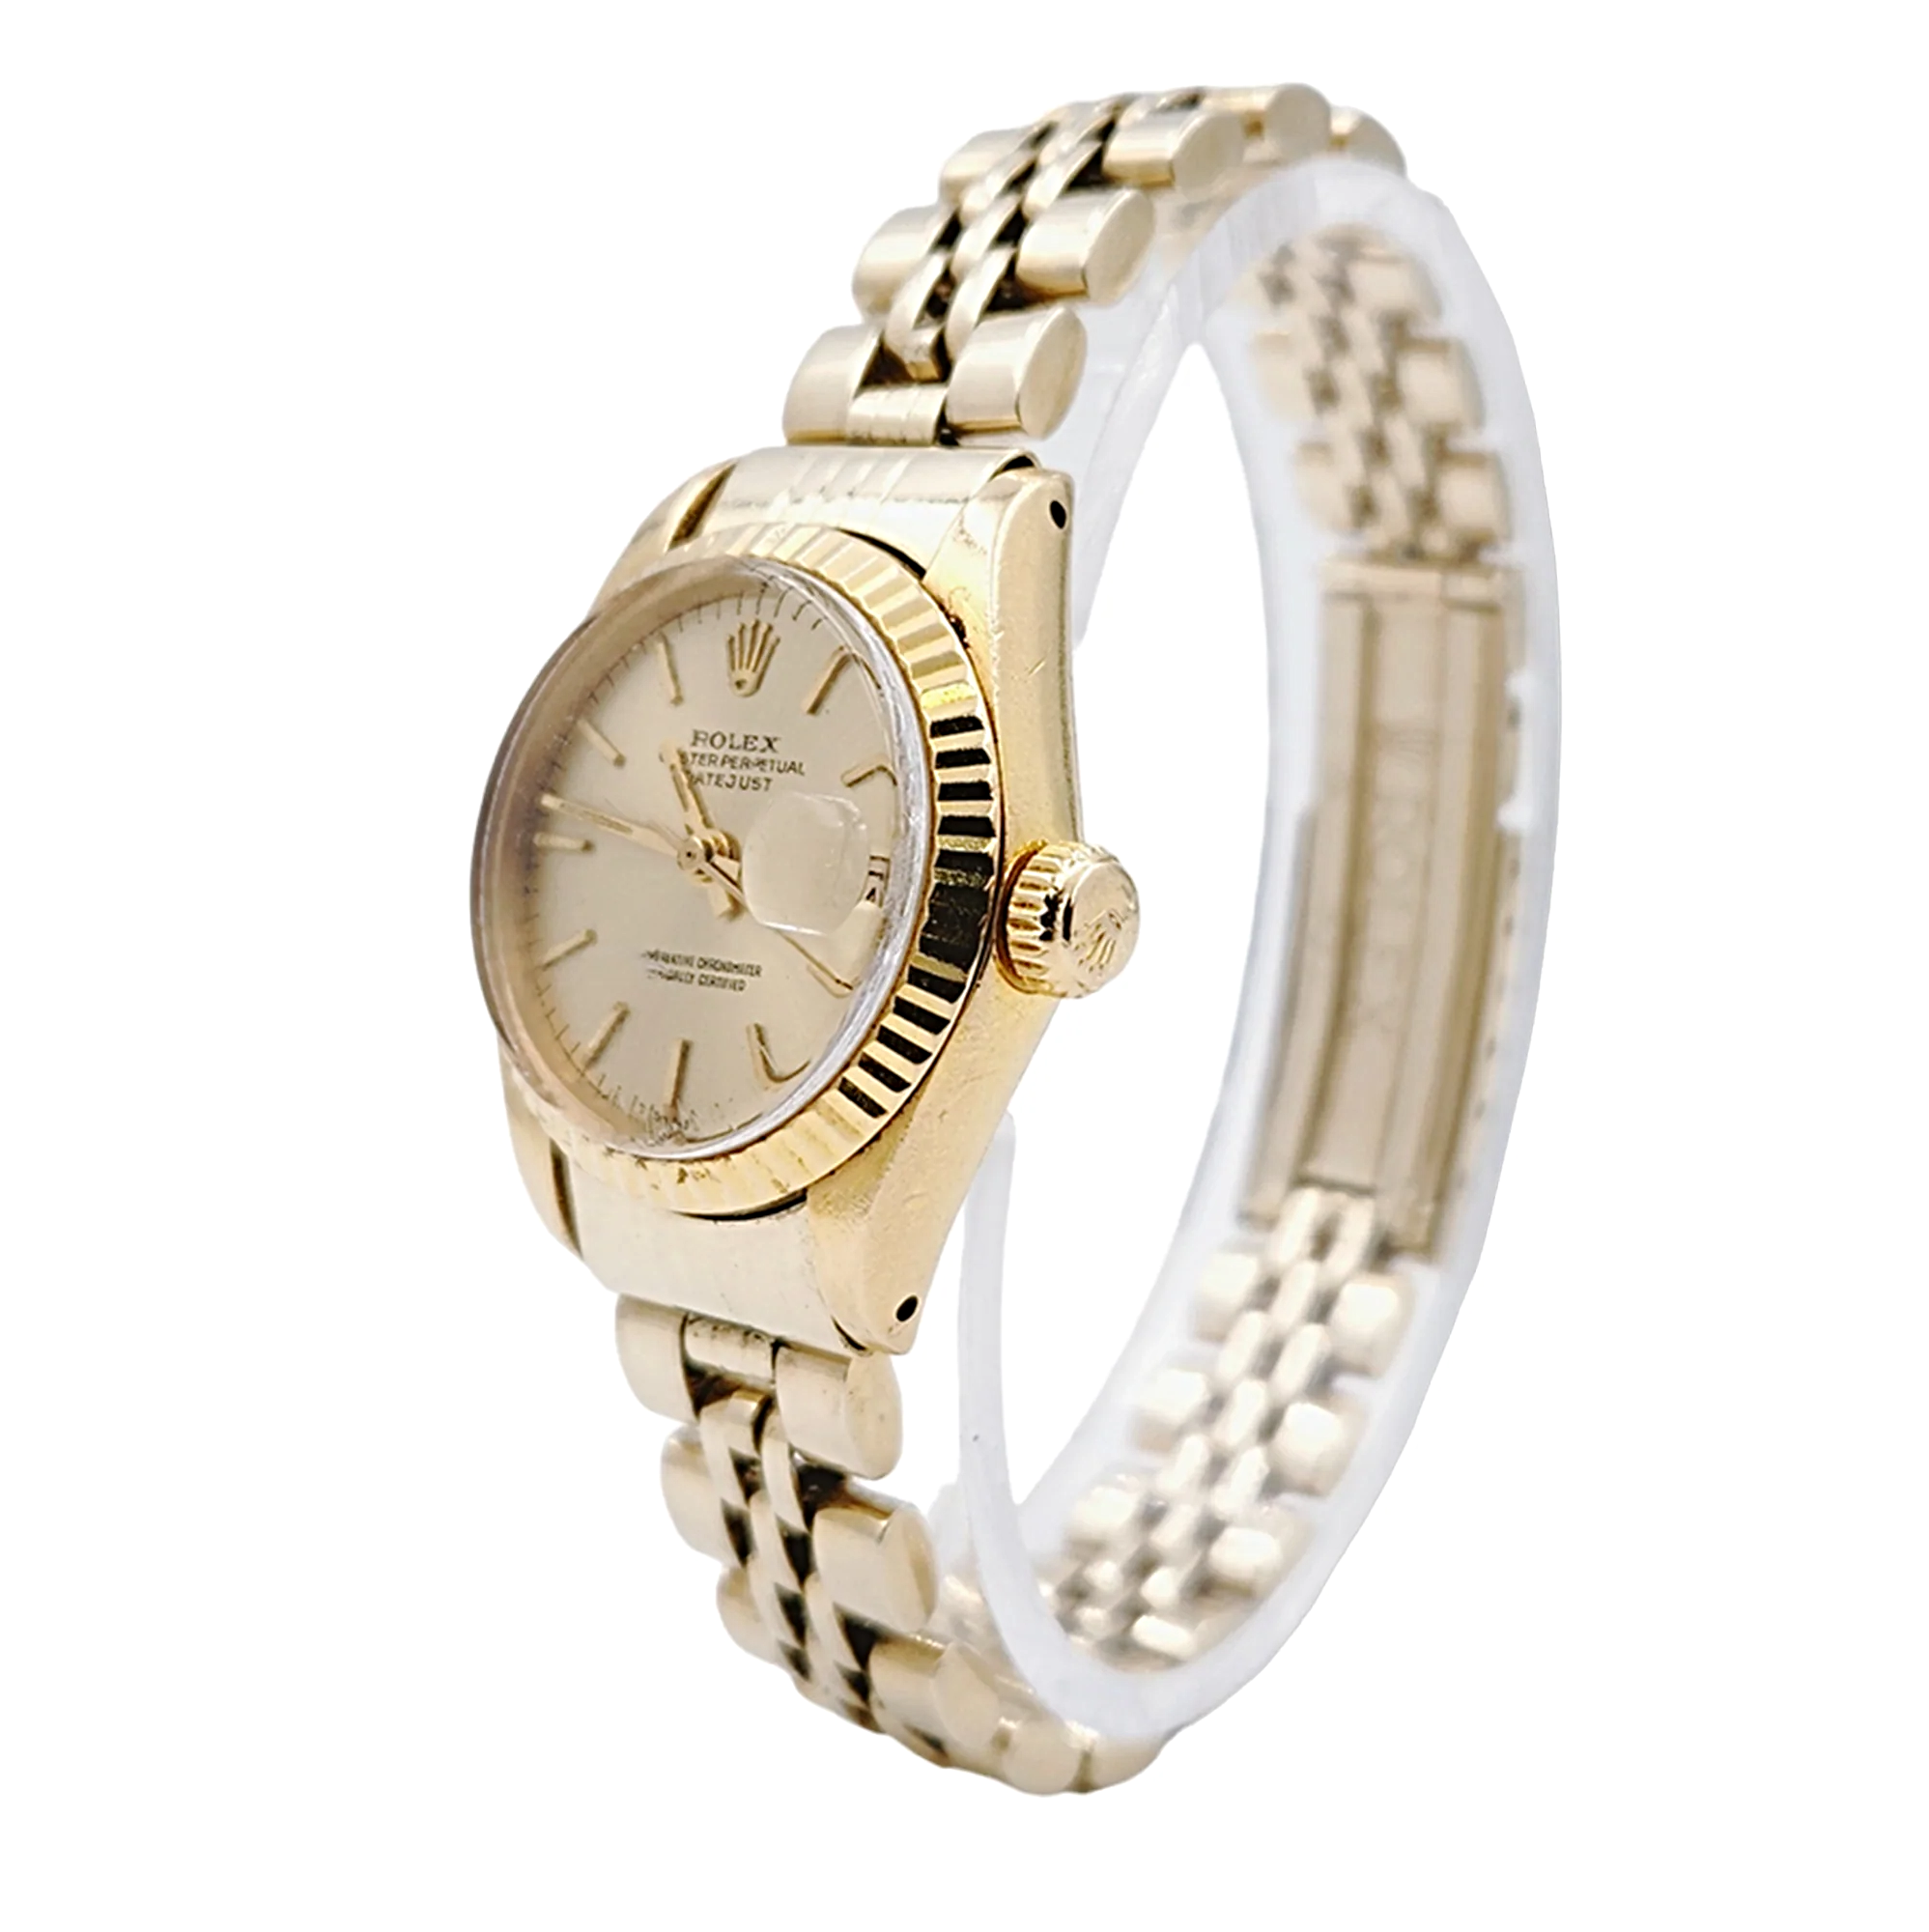 Ladies Rolex DateJust 26mm Vintage Solid 14K Yellow Gold Watch with Champagne Dial and Fluted Bezel. (Pre-Owned 6917)